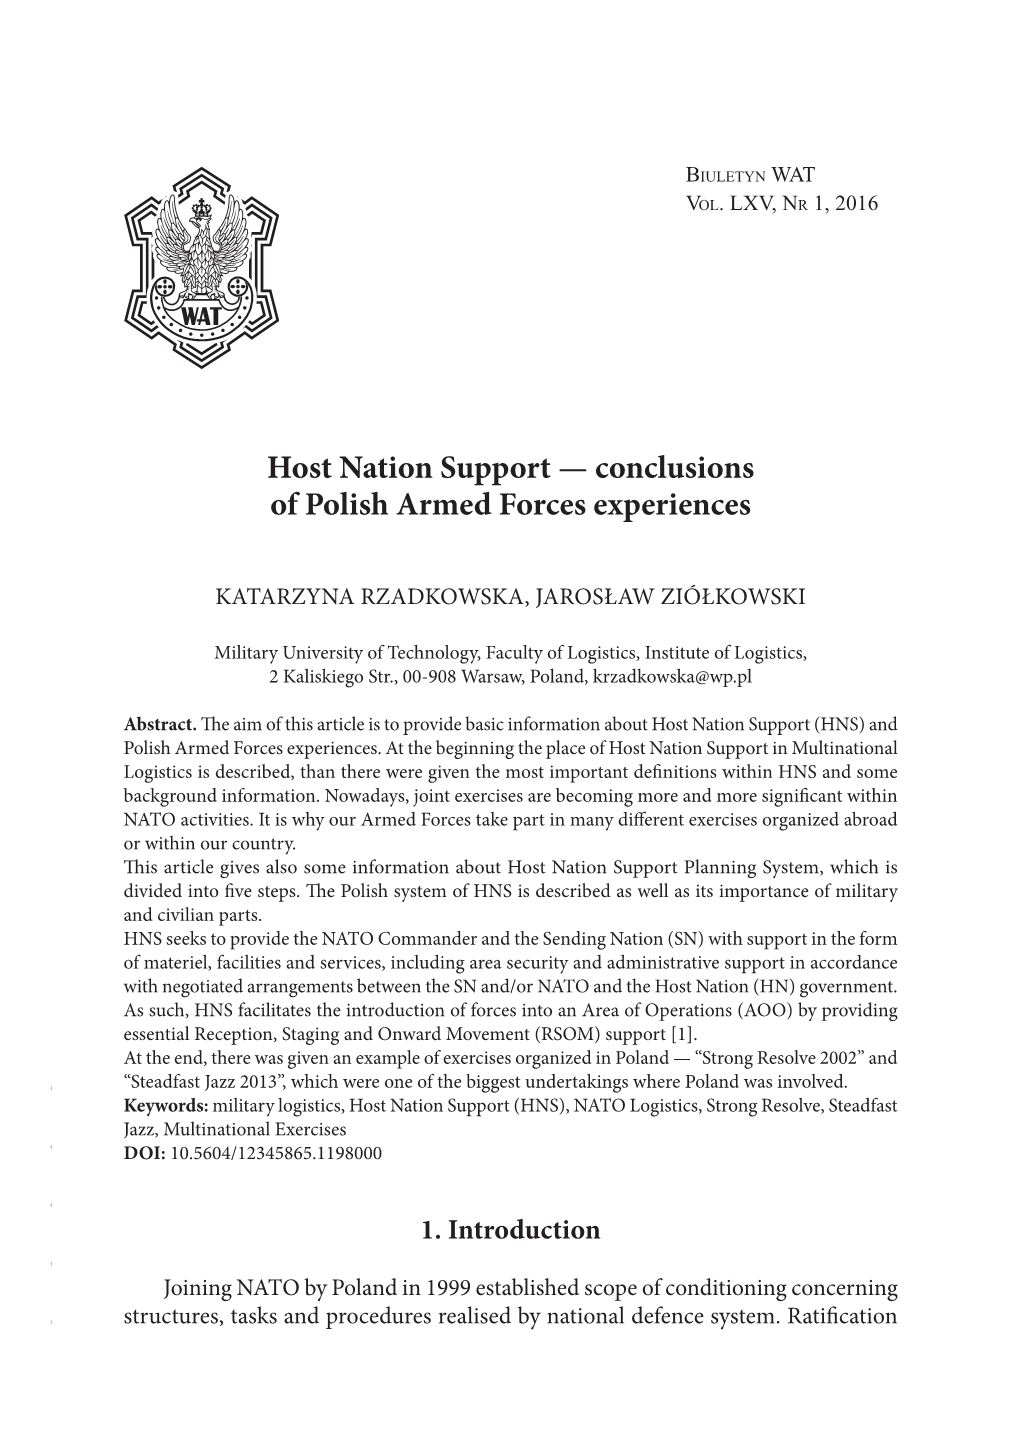 Host Nation Support — Conclusions of Polish Armed Forces Experiences